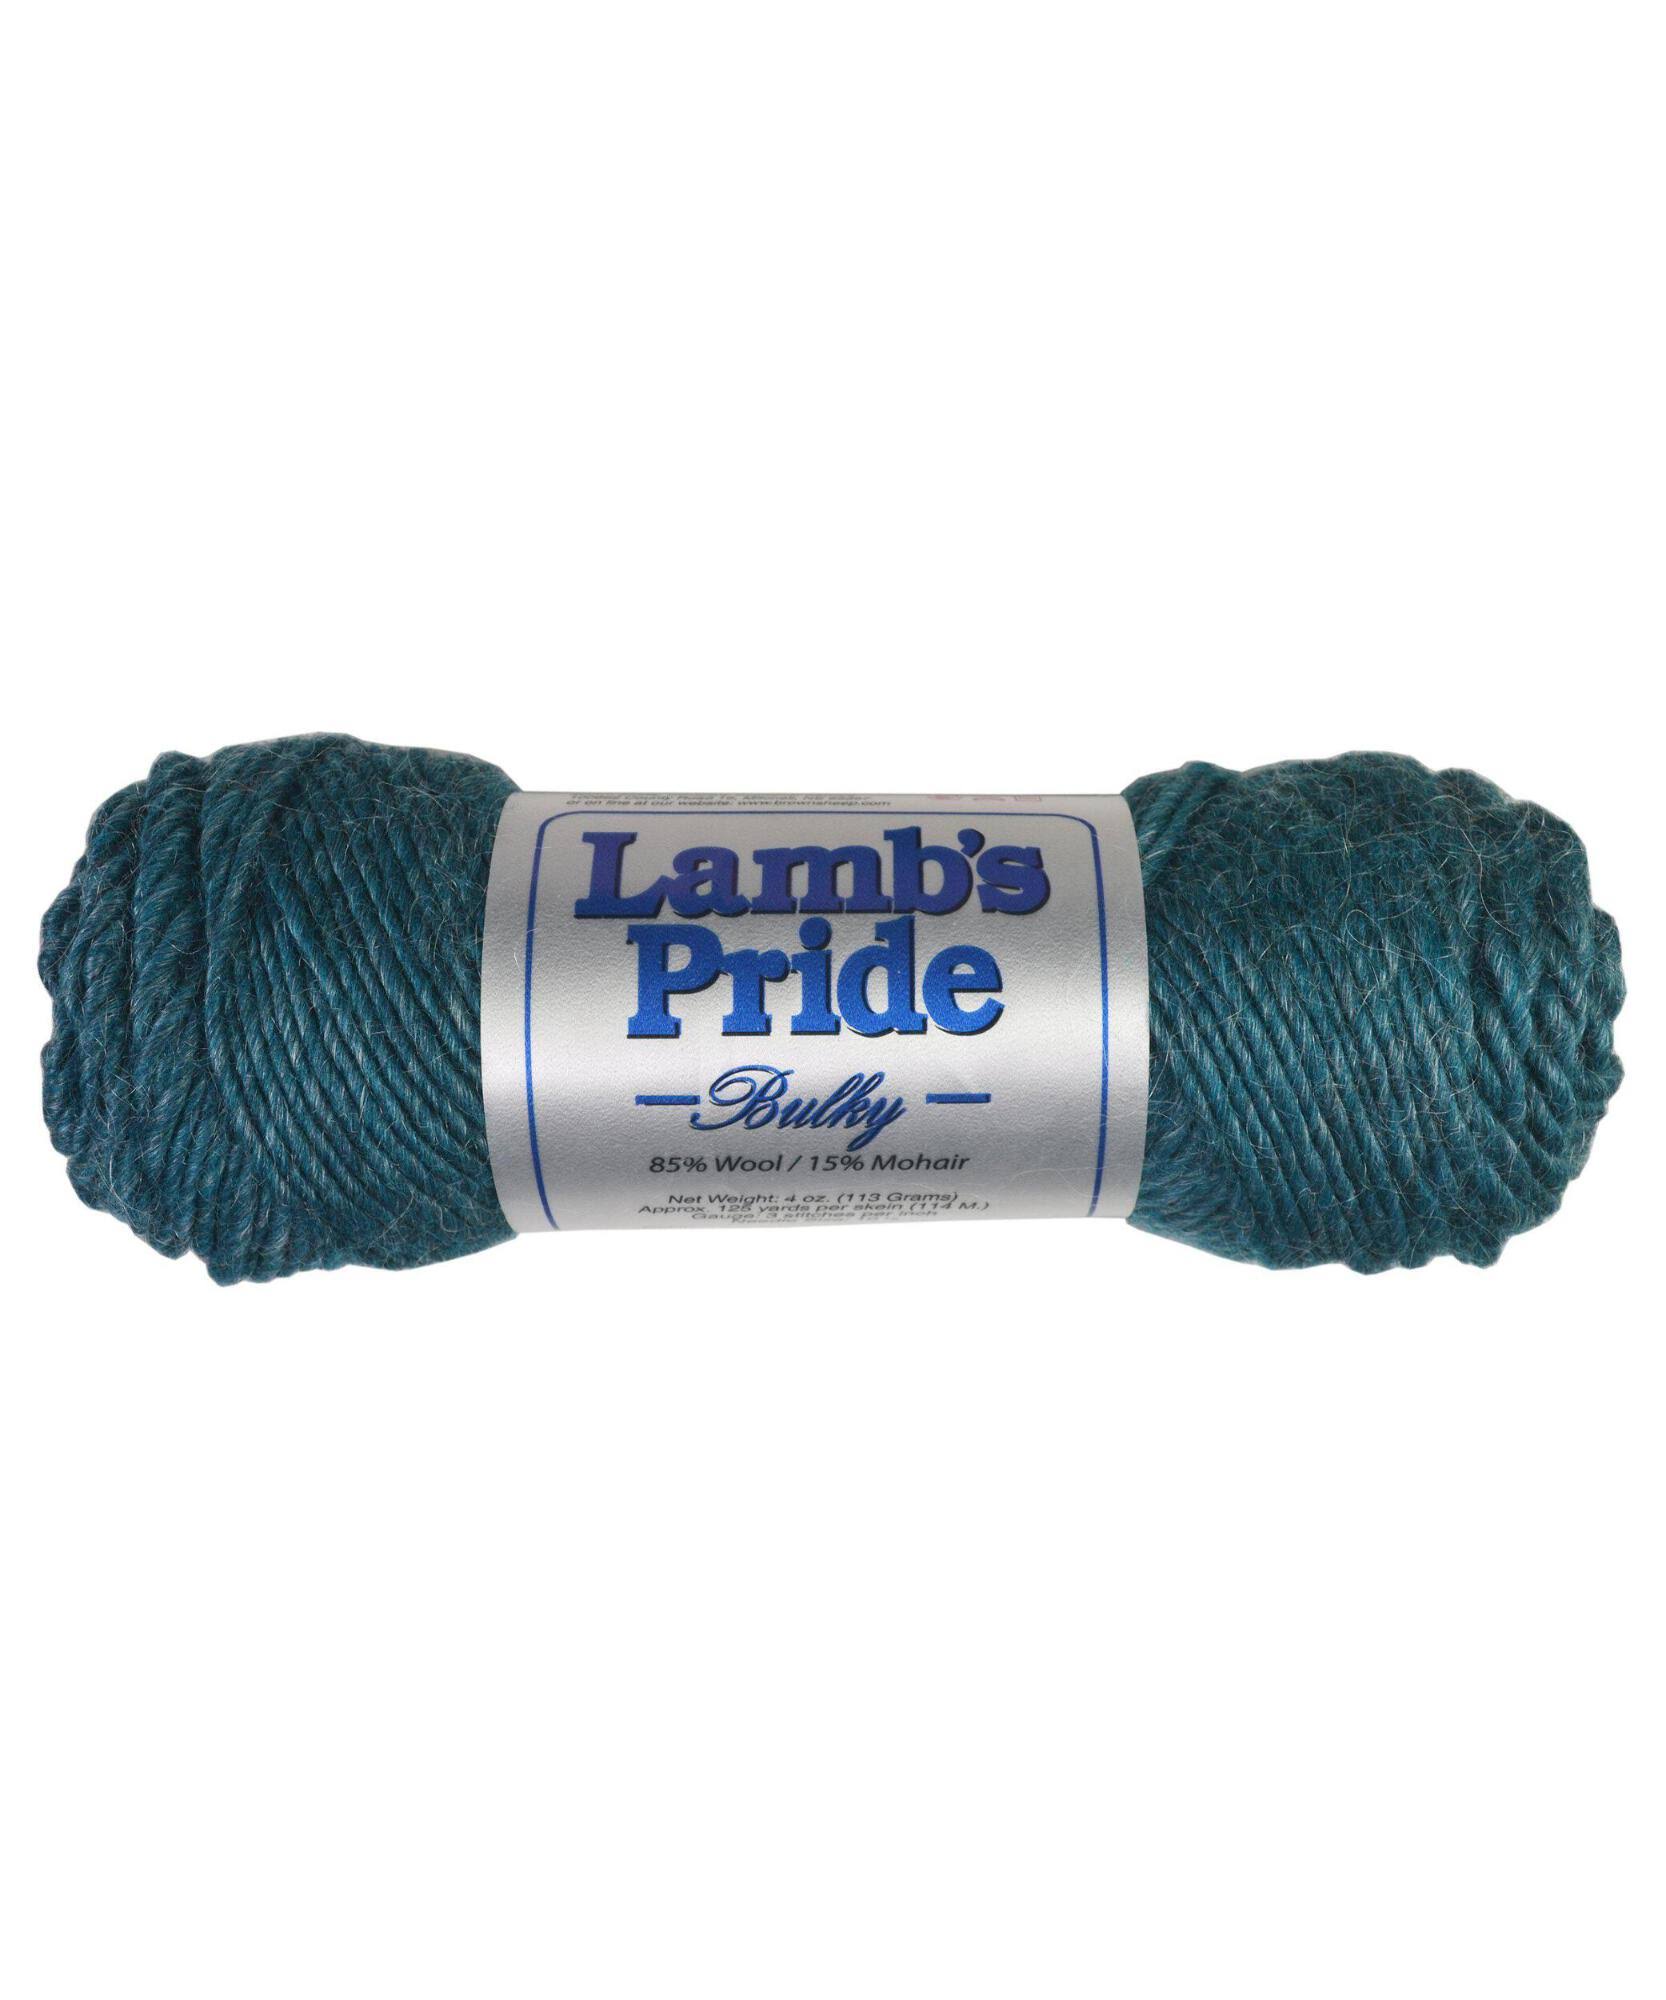 Lambs Pride Bulky by Brown Sheep (140 Aran) | Knitting & Crochet | Free Shipping On All Orders | Delivery guaranteed | 30 Day Money Back Guarantee